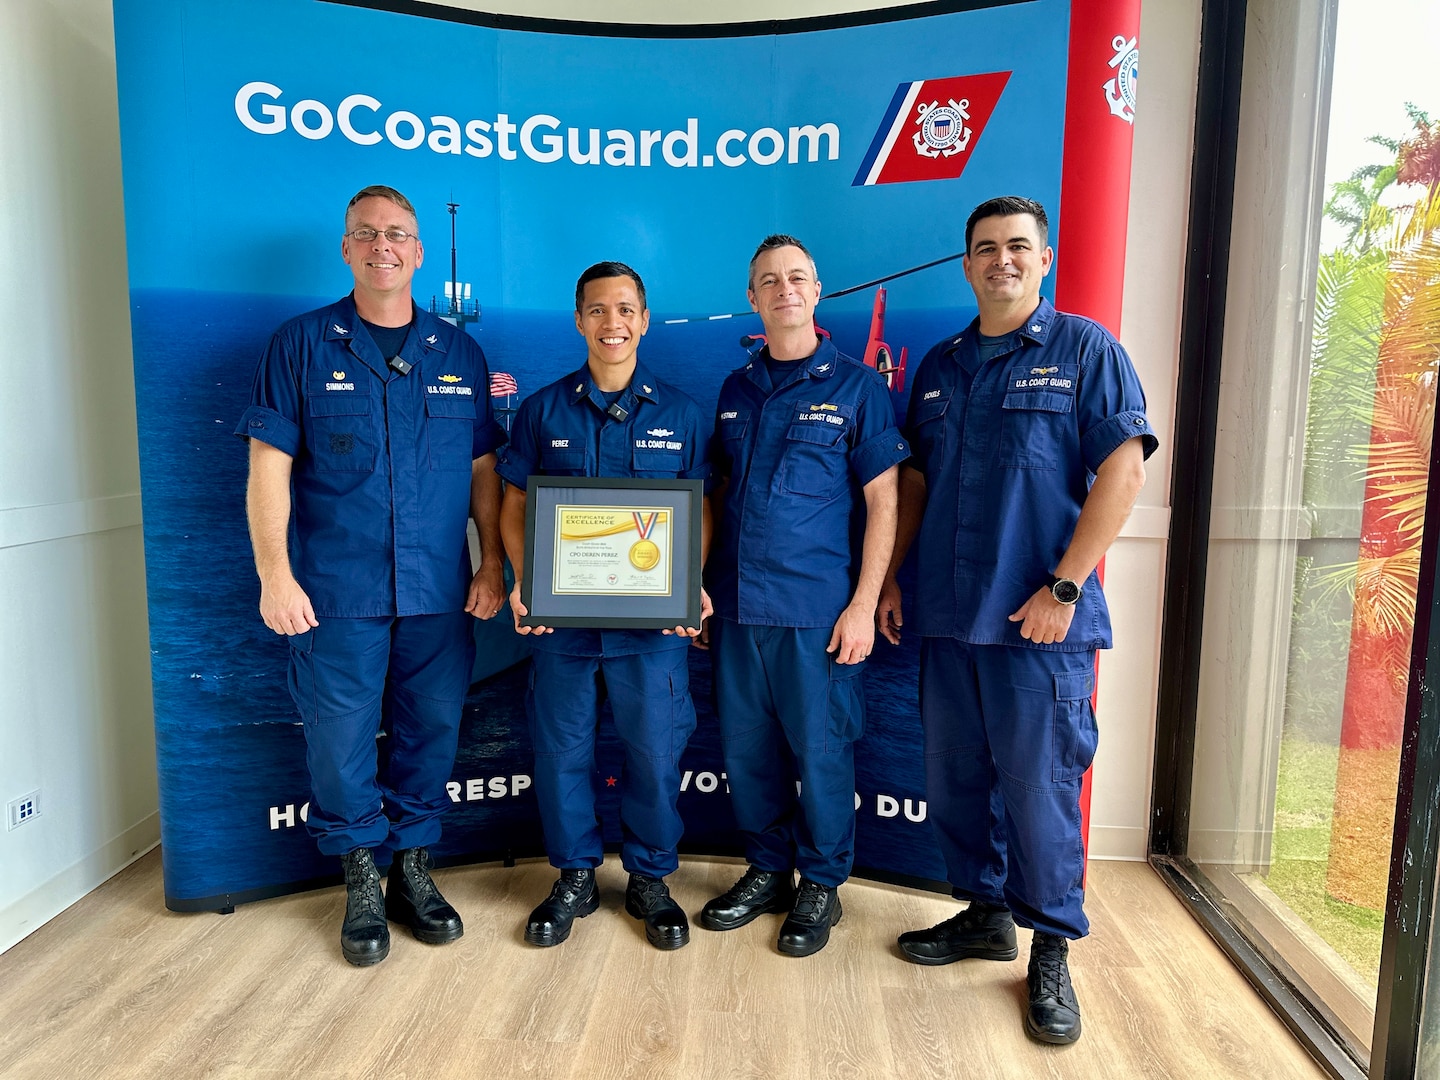 Chief Petty Officer Deren Perez, a figure of inspiration and leadership within the U.S. Coast Guard, is presented with the U.S. Coast Guard's Elite Male Athlete of the Year award by the U.S. Coast Guard Forces Micronesia Sector Guam command at the newly relocated recruiting office in Tamuning, Guam, on May 17, 2024. The award, presented on behalf of the U.S. Coast Guard MWR and the Community Services Command, is a testament to his exceptional athletic abilities and his unwavering dedication to his community. (U.S. Coast Guard photo by Chief Warrant Officer Sara Muir)